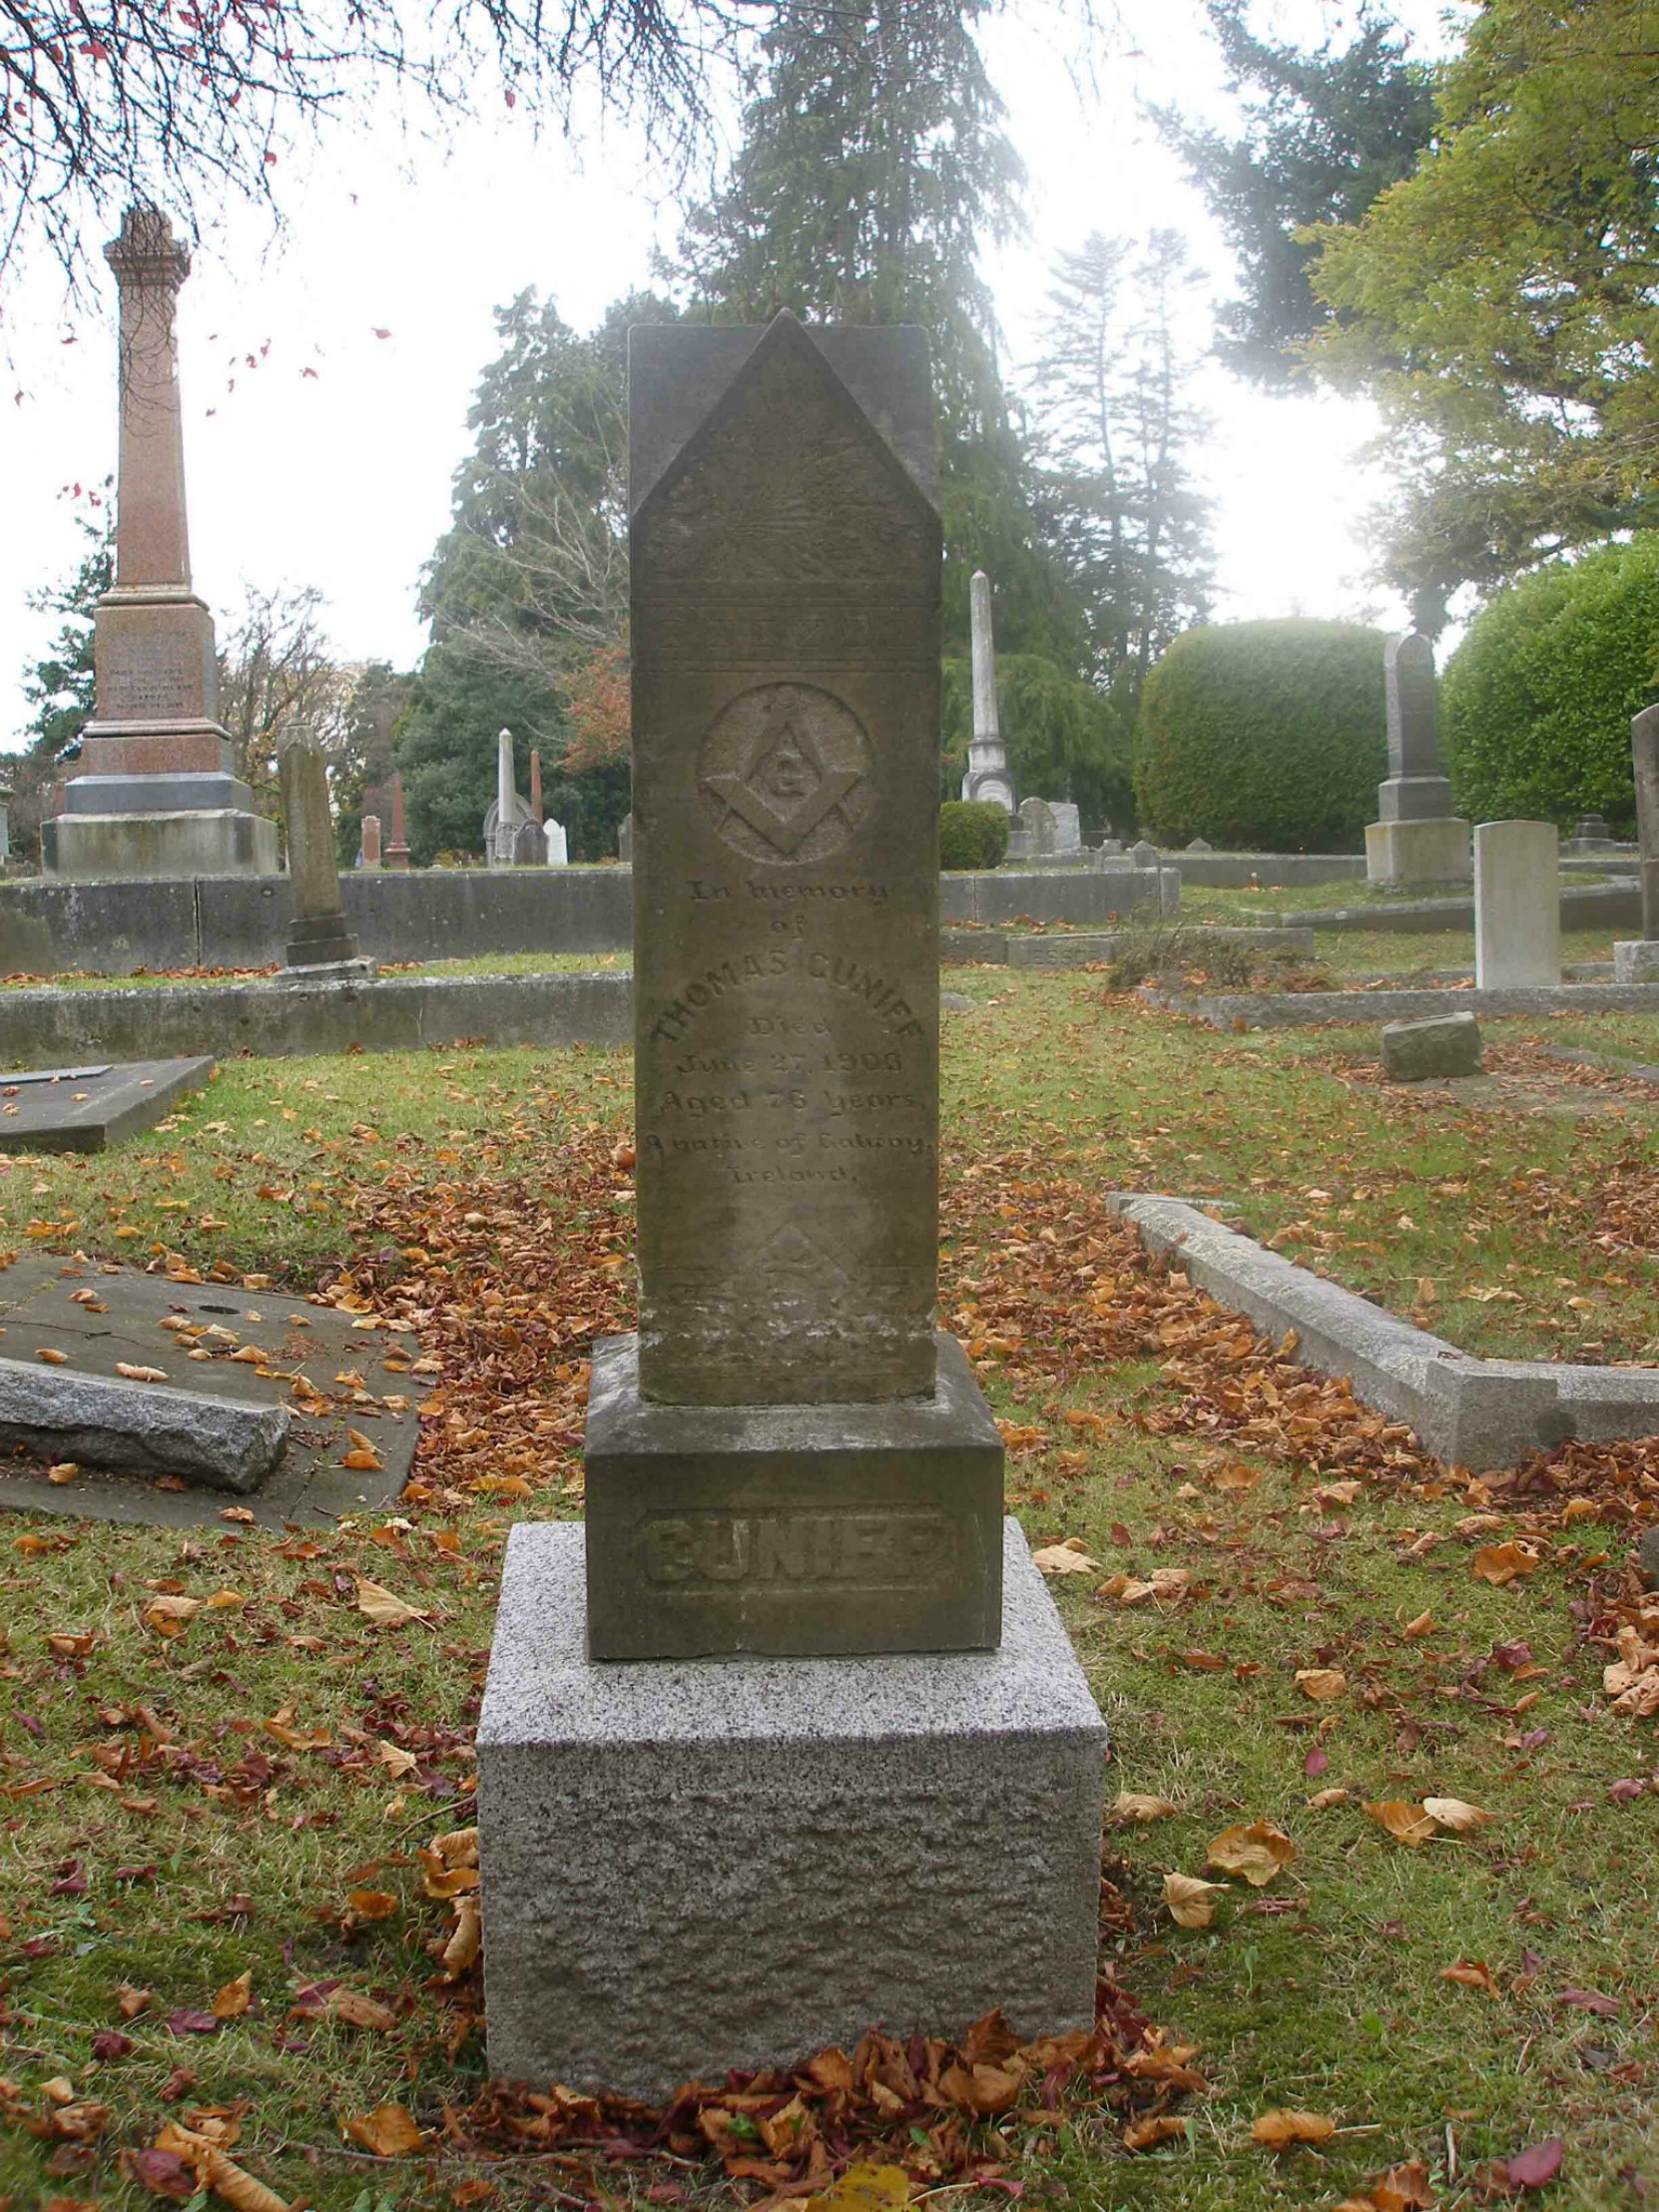 The grave of Thomas Cuniff, Ross Bay Cemetery, Victoria, B.C.